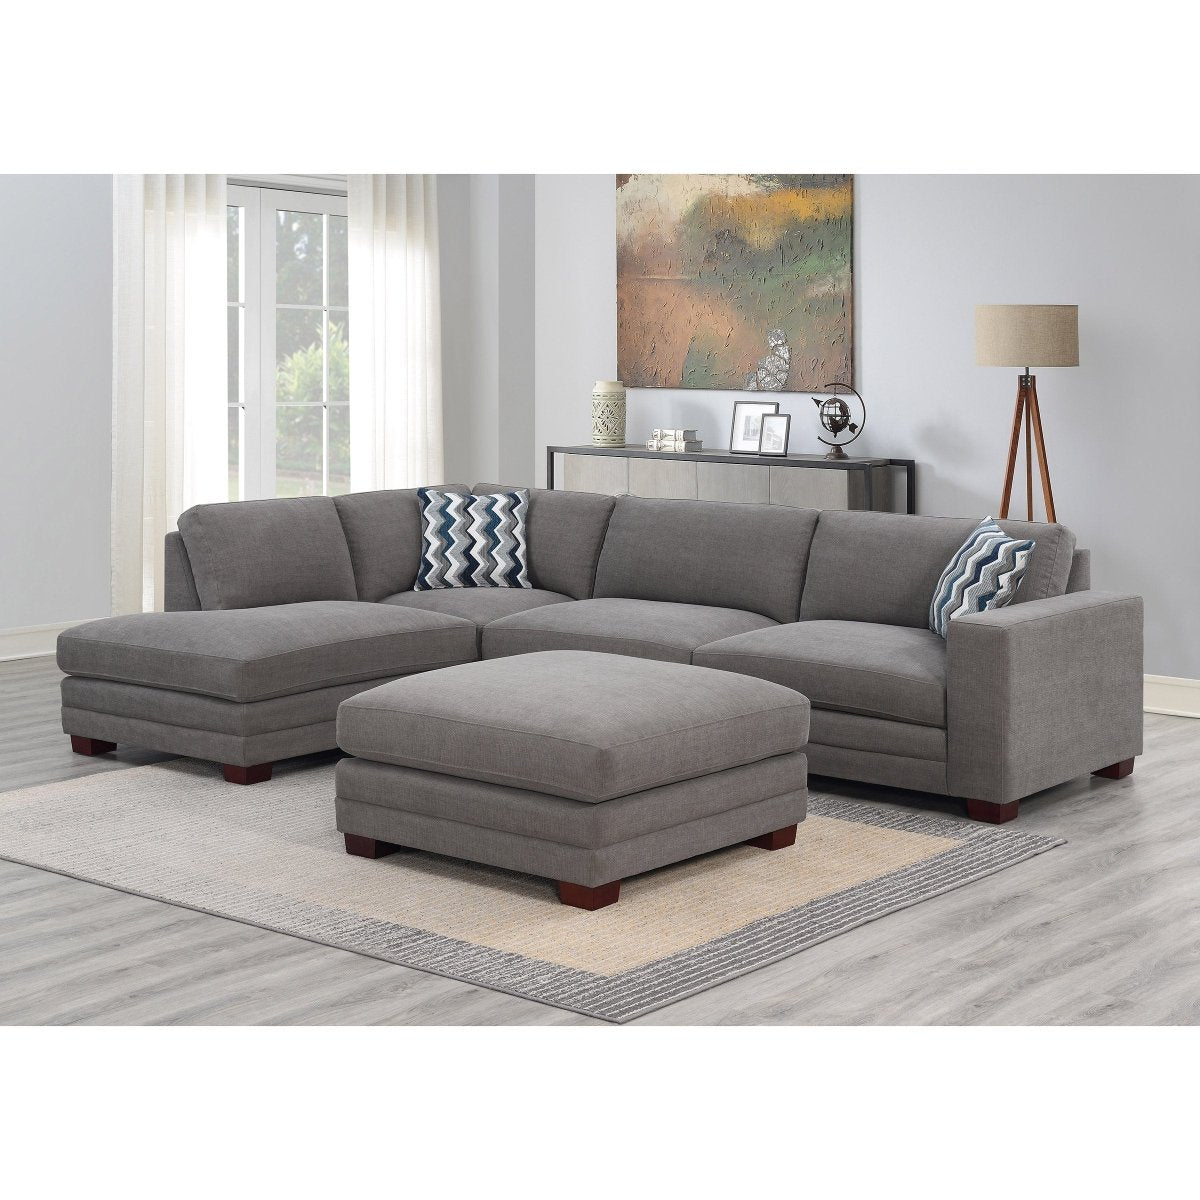 Penelope Fabric Sectional with Ottoman - Alpine Outlets